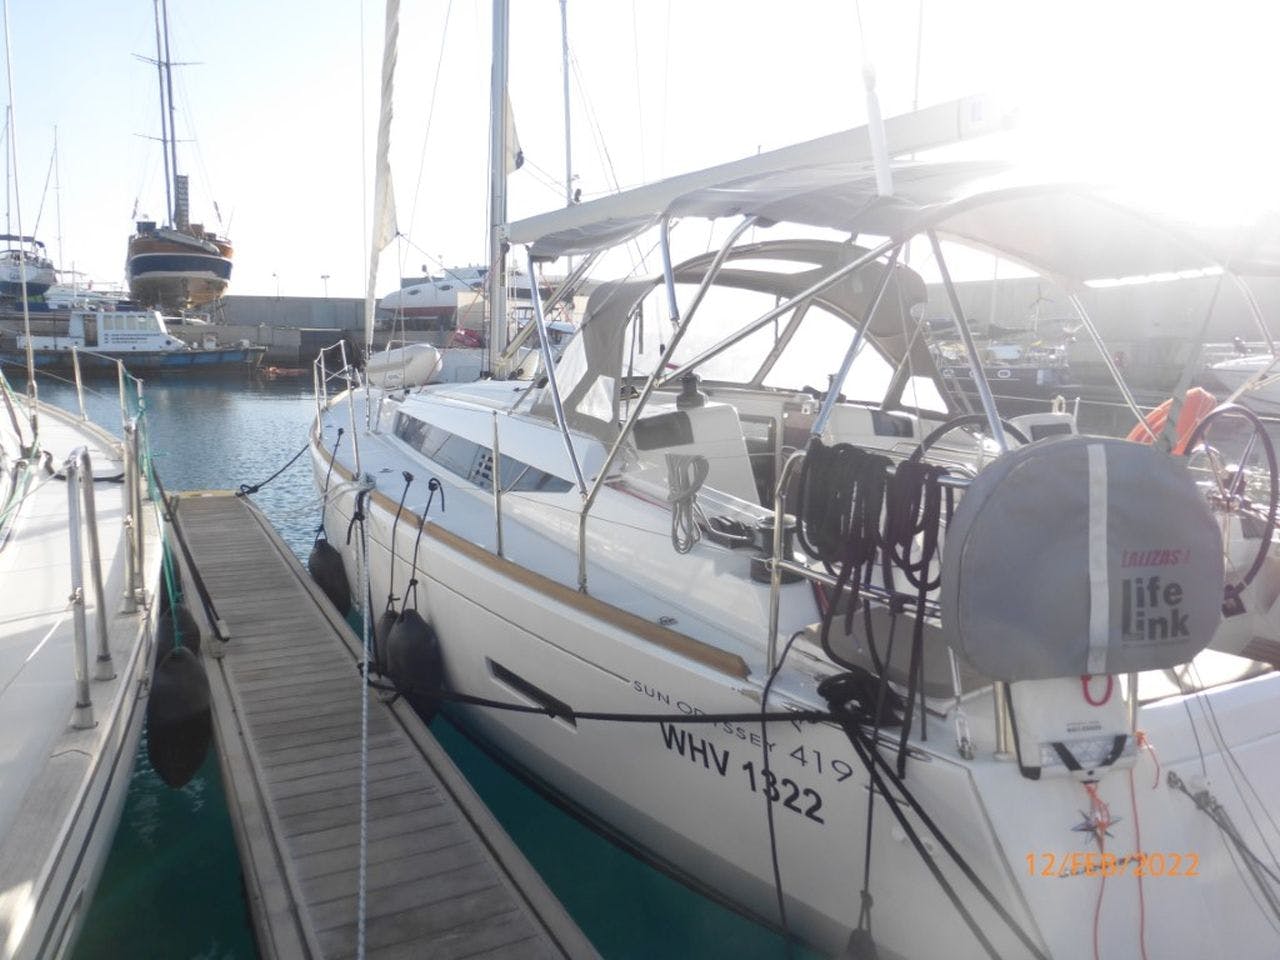 Book Sun Odyssey 419 Sailing yacht for bareboat charter in Tenerife, San Miguel Marina, Canary Islands, Spain with TripYacht!, picture 3